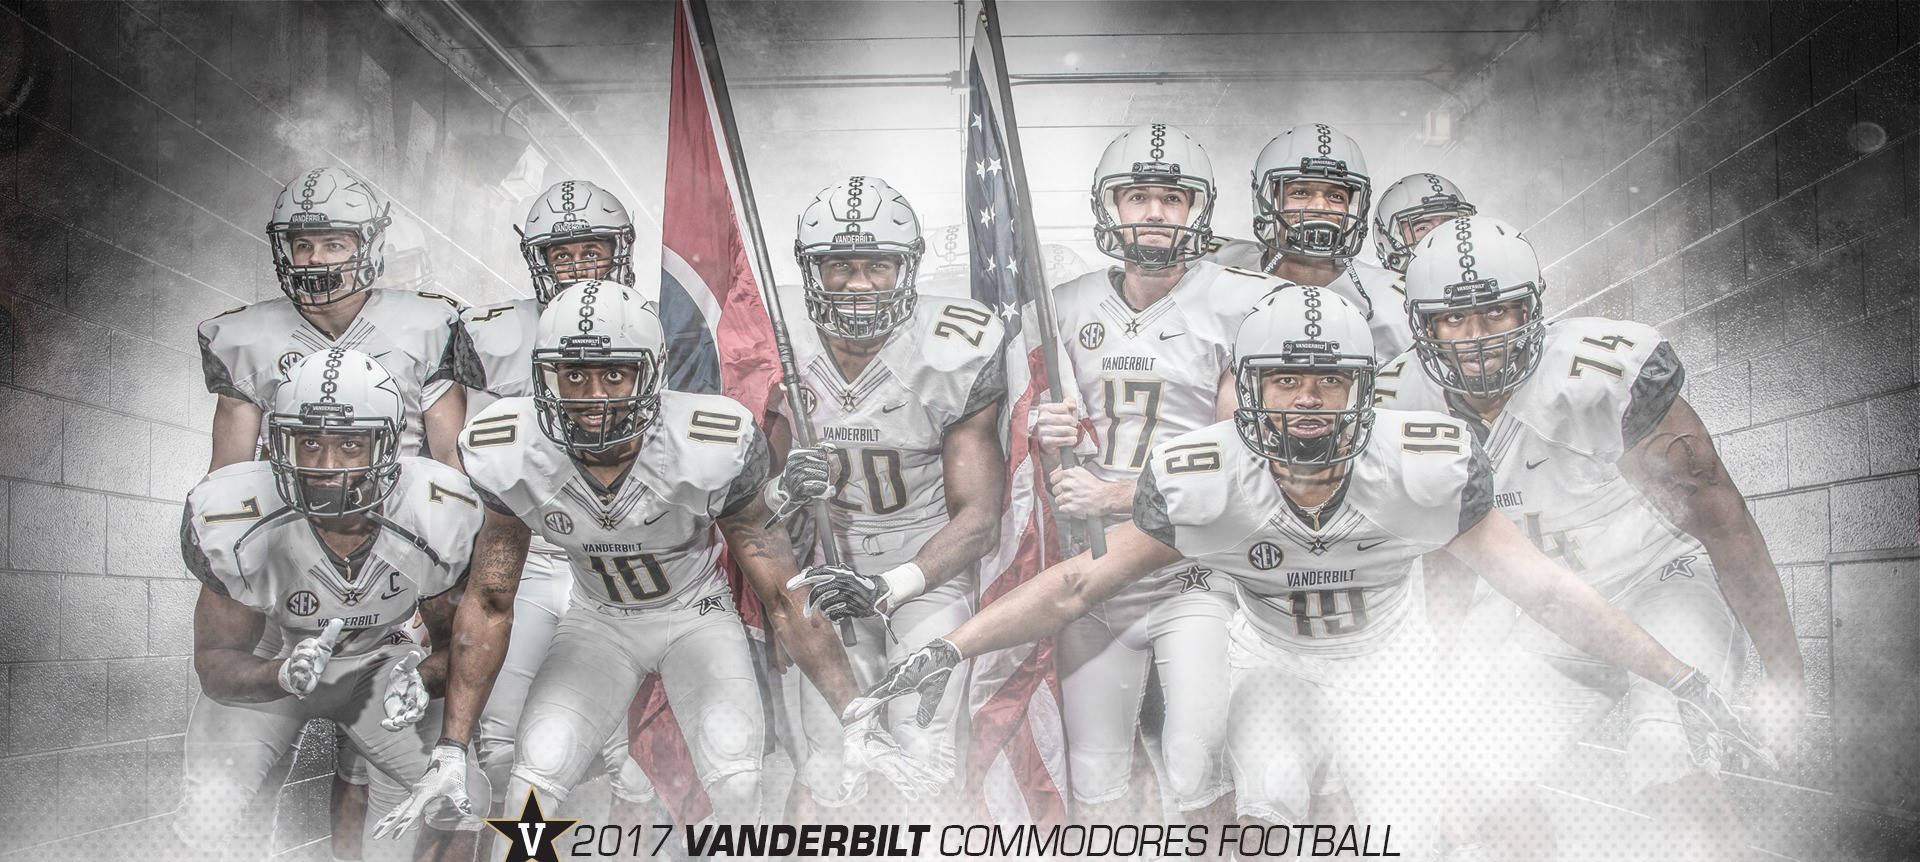 The Commodores Wallpapers